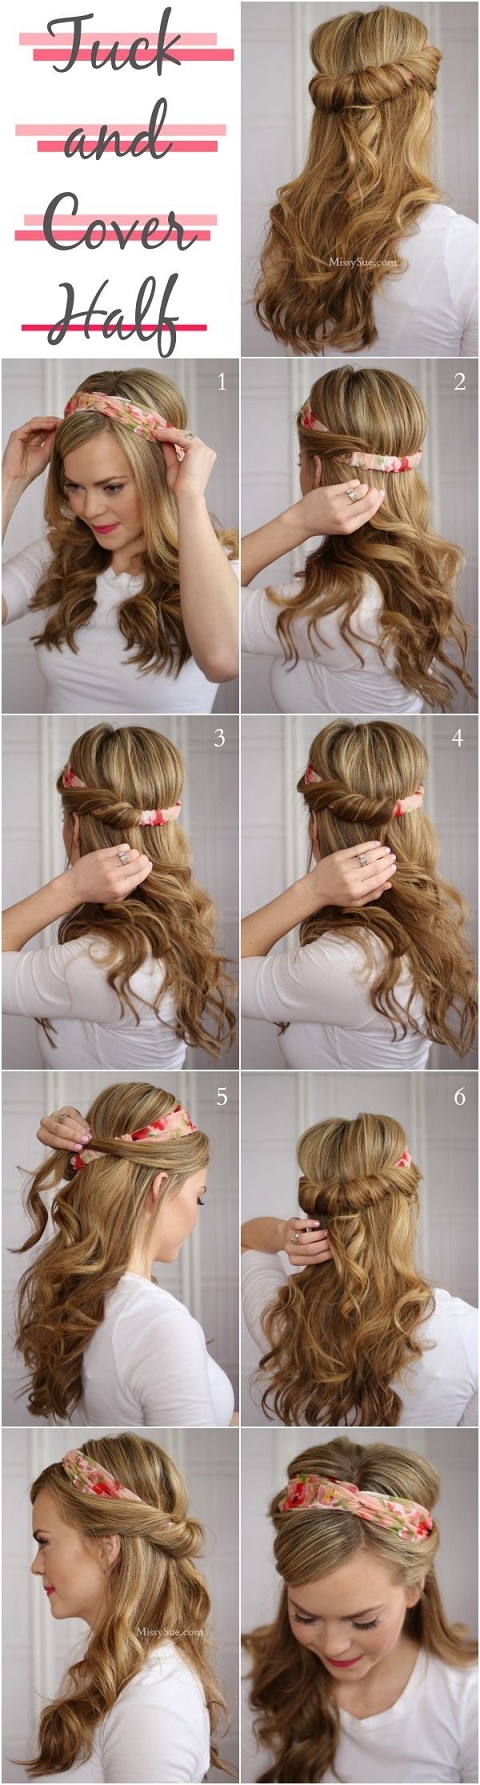 lazy hairstyle4